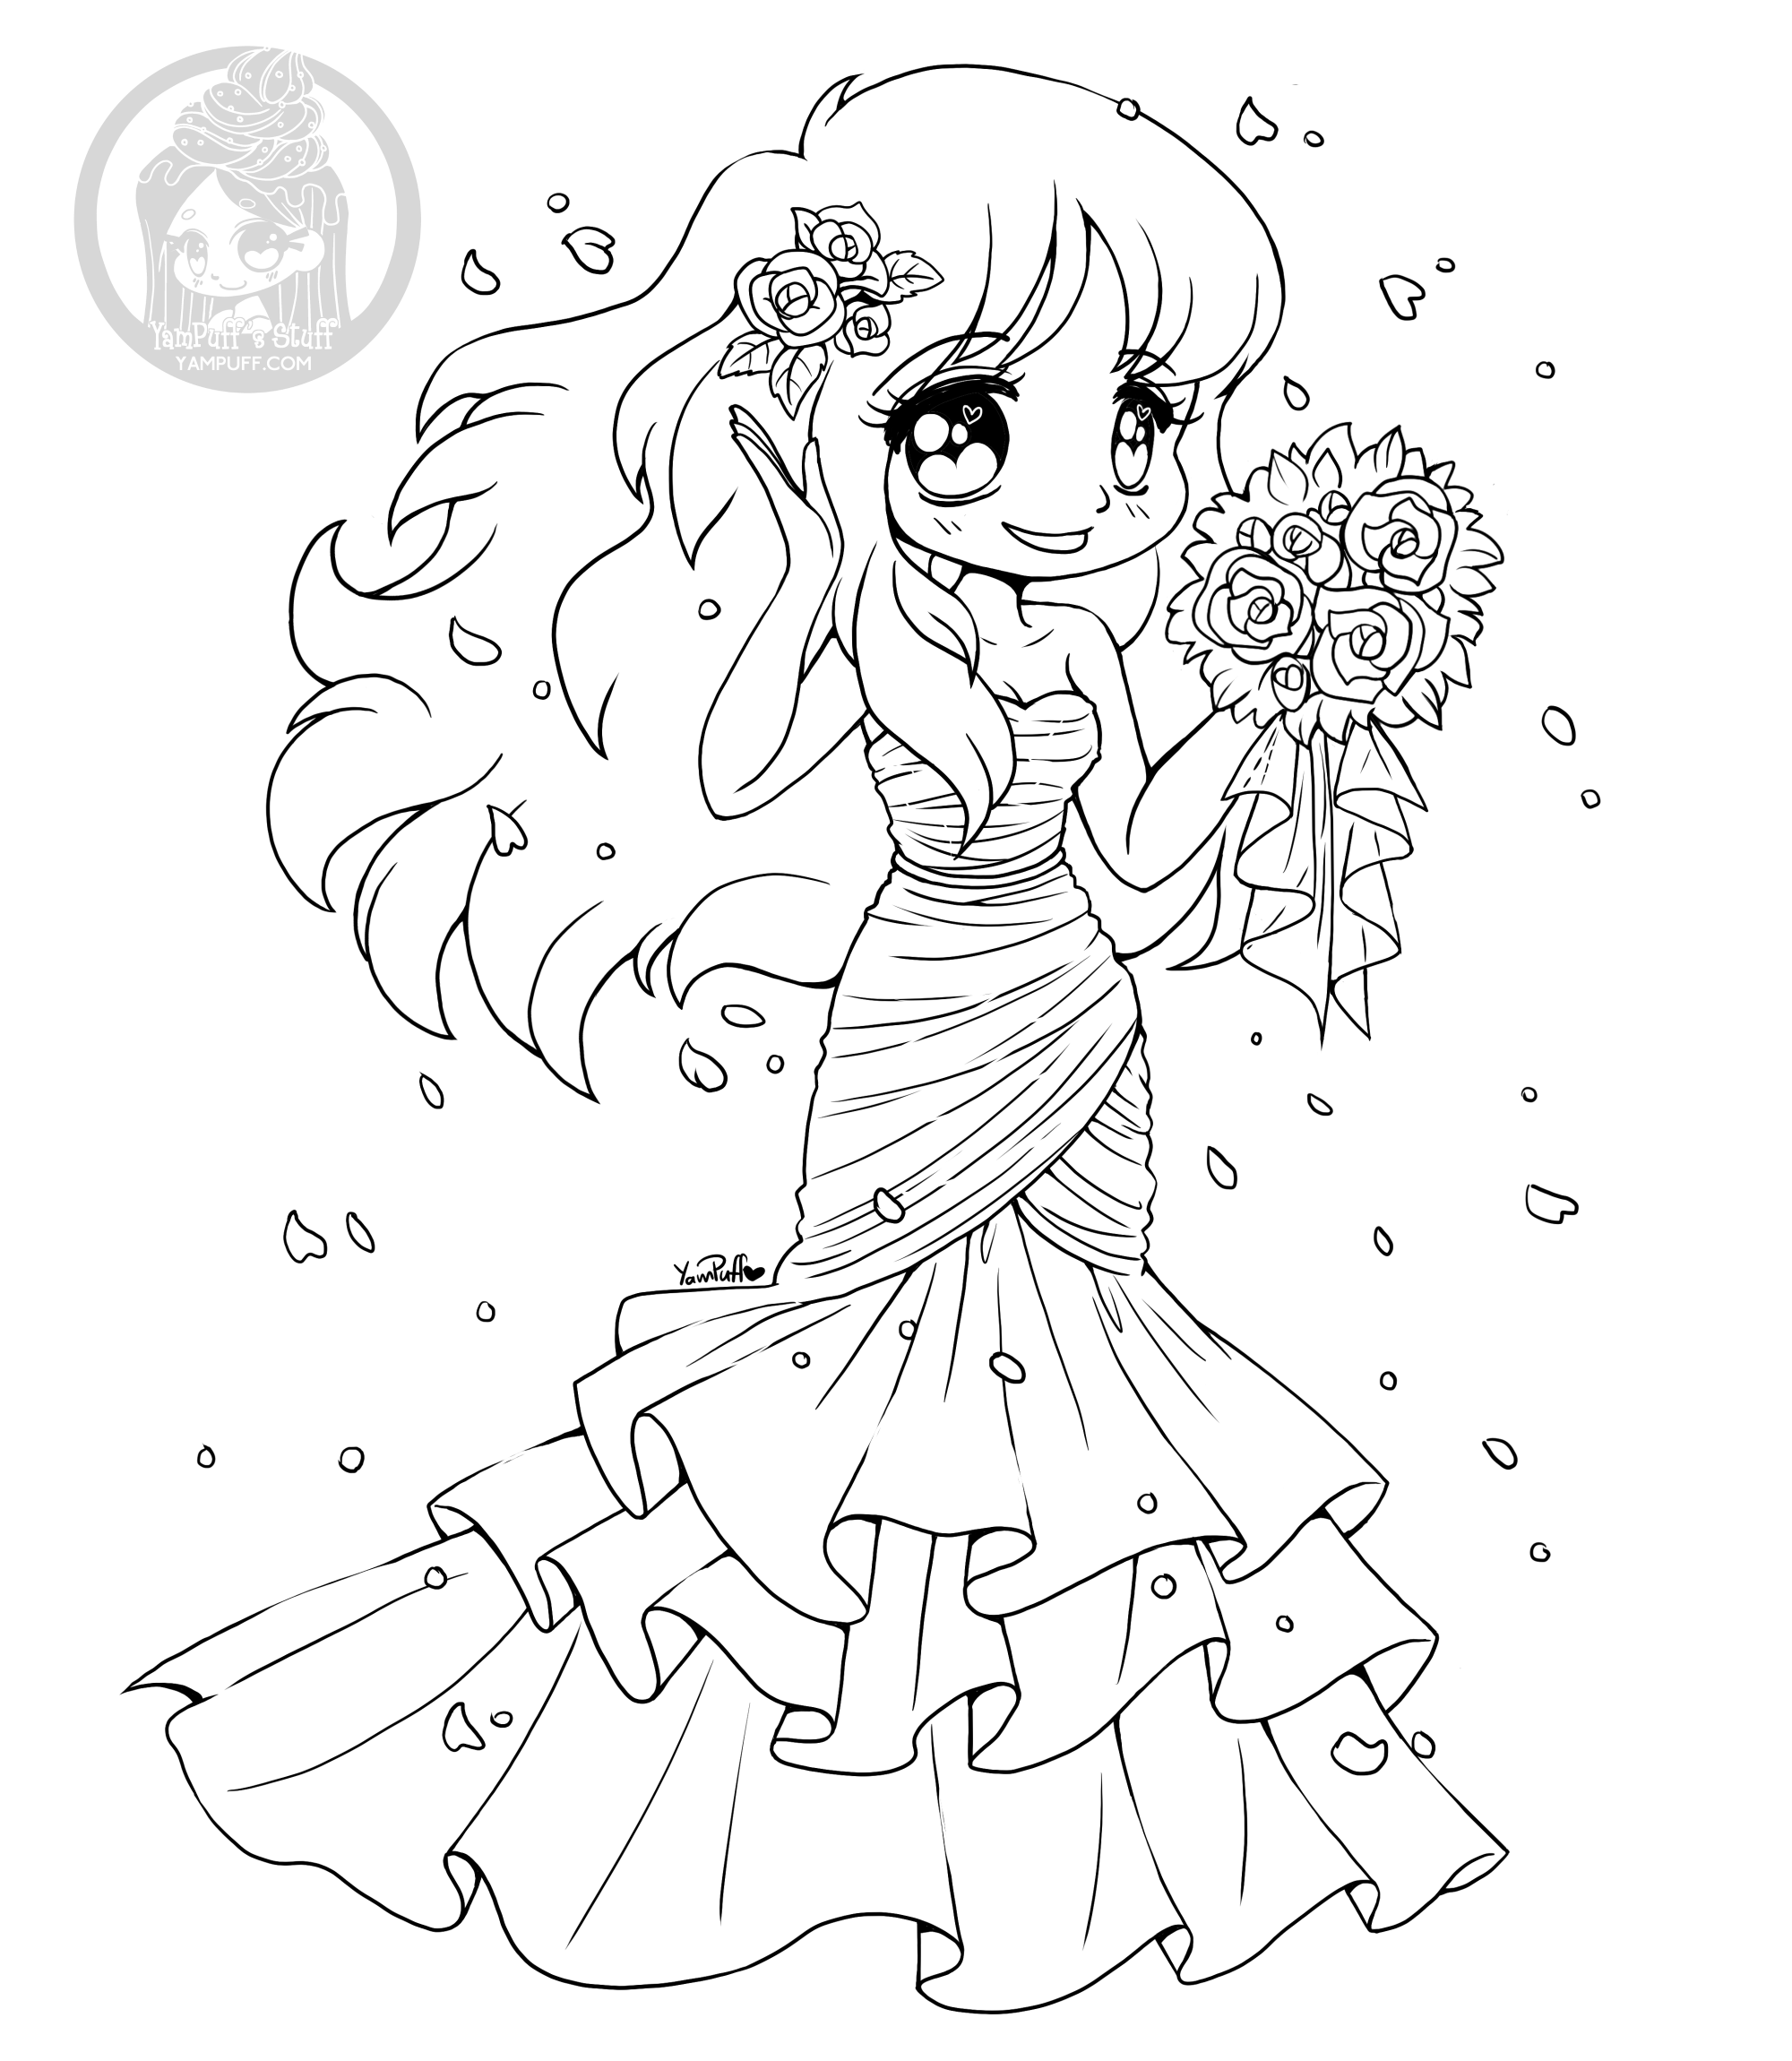 Beautiful Brides Free Coloring Pages • YamPuff's Stuff